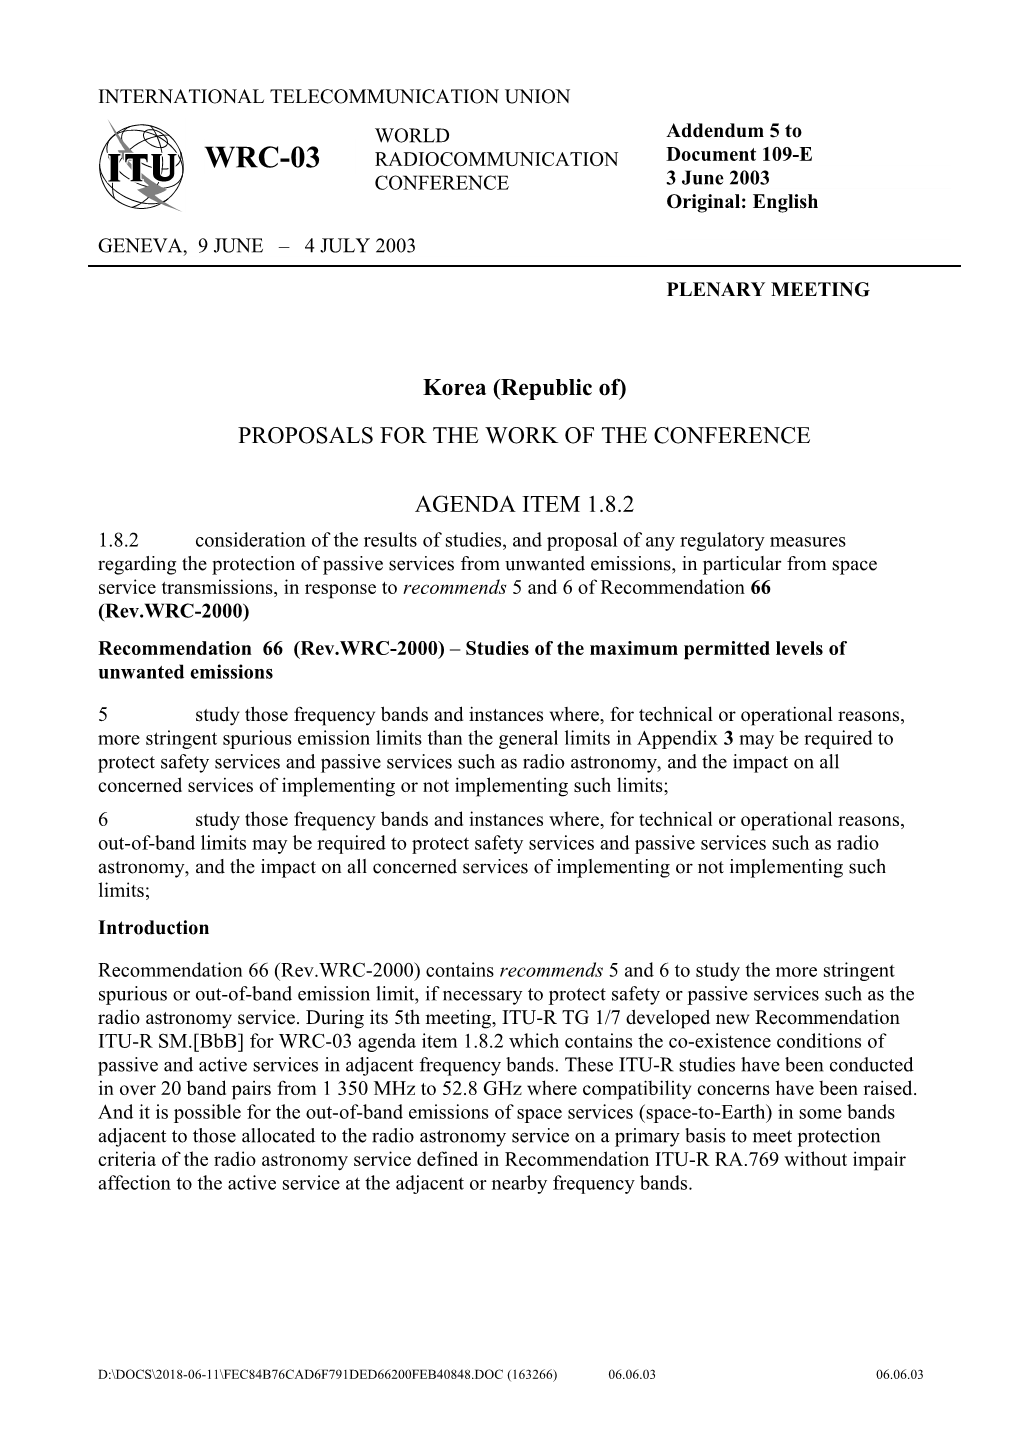 Proposals for the Work of the Conference: Agenda Item 1.8.2